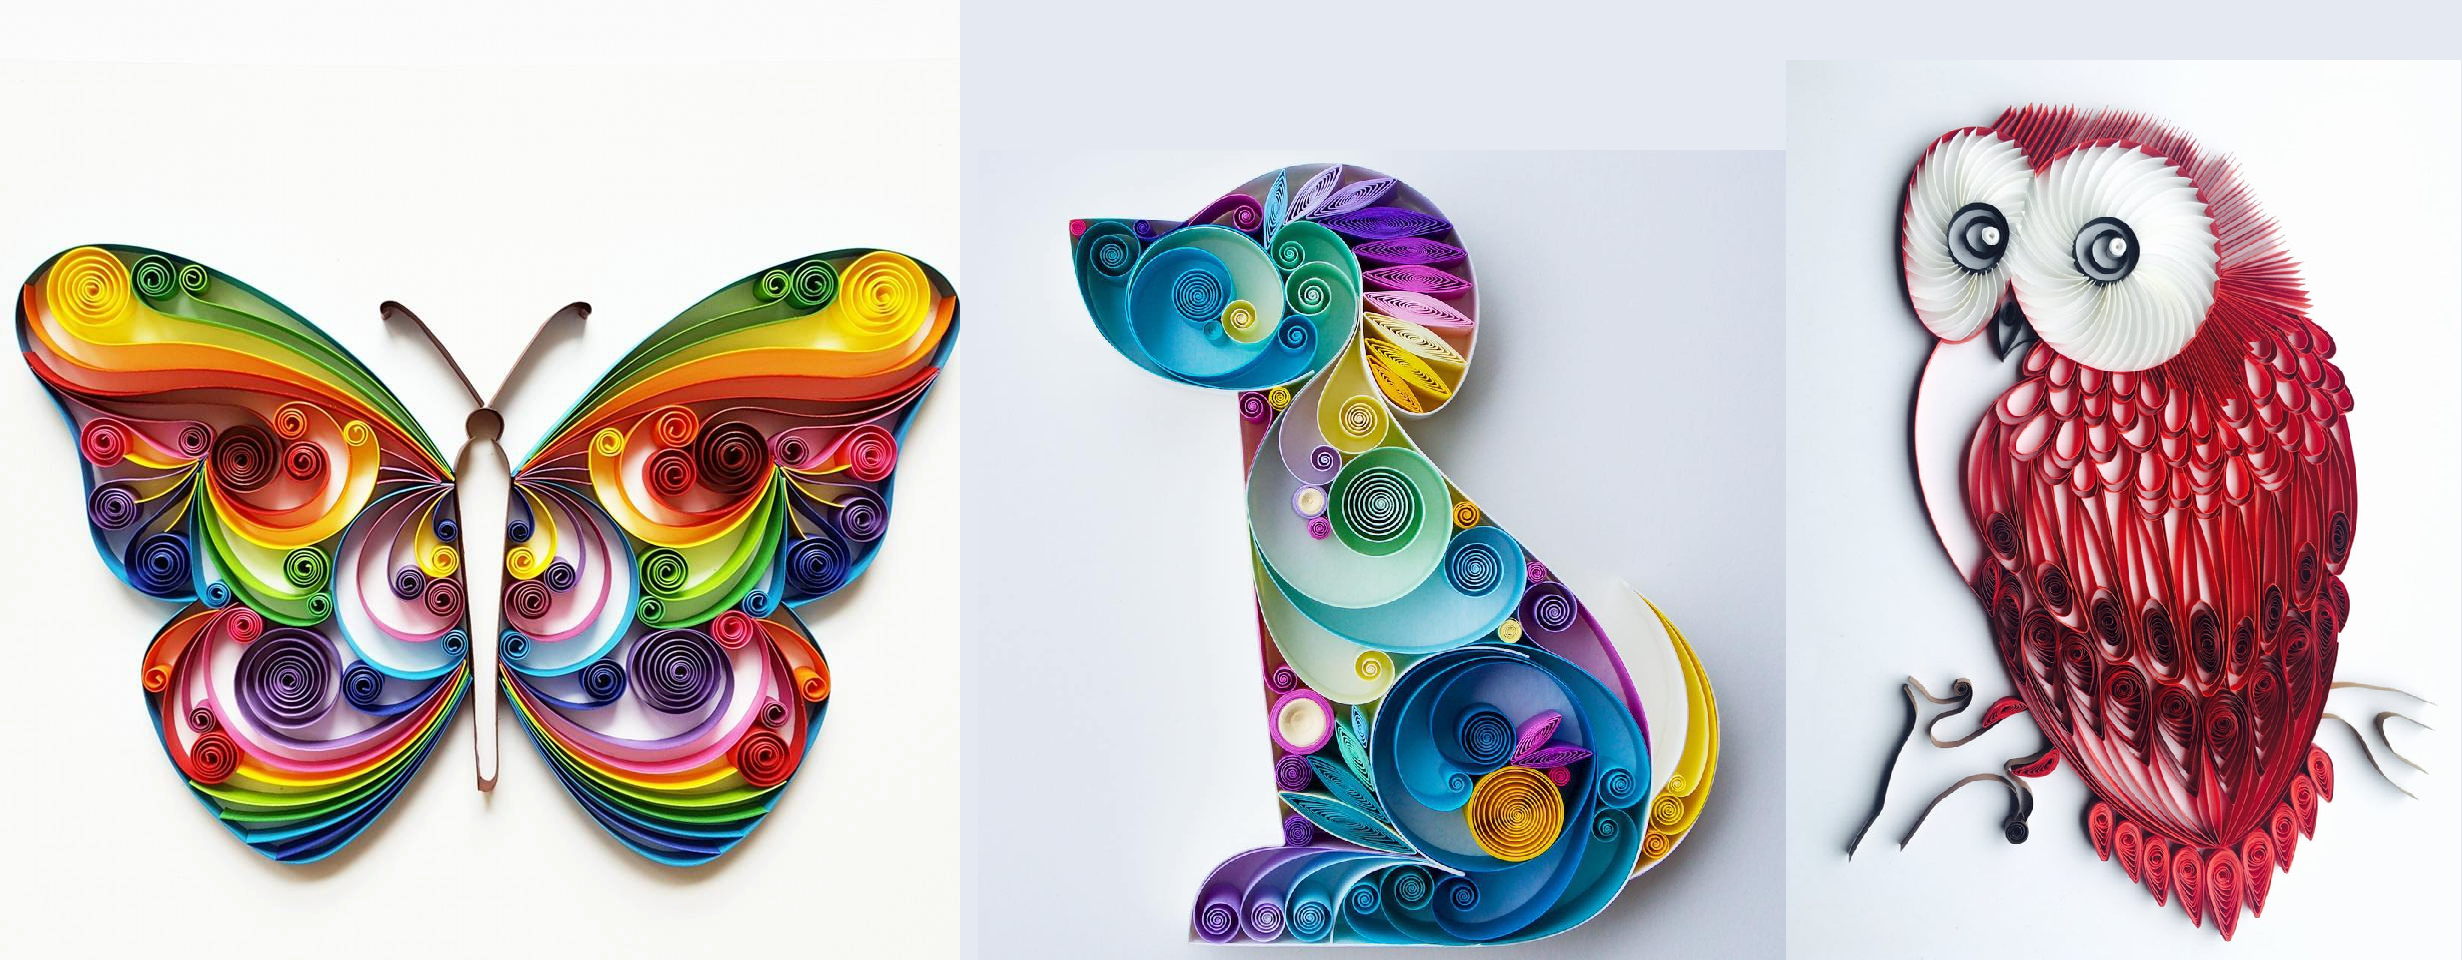 animals made with paper quilling